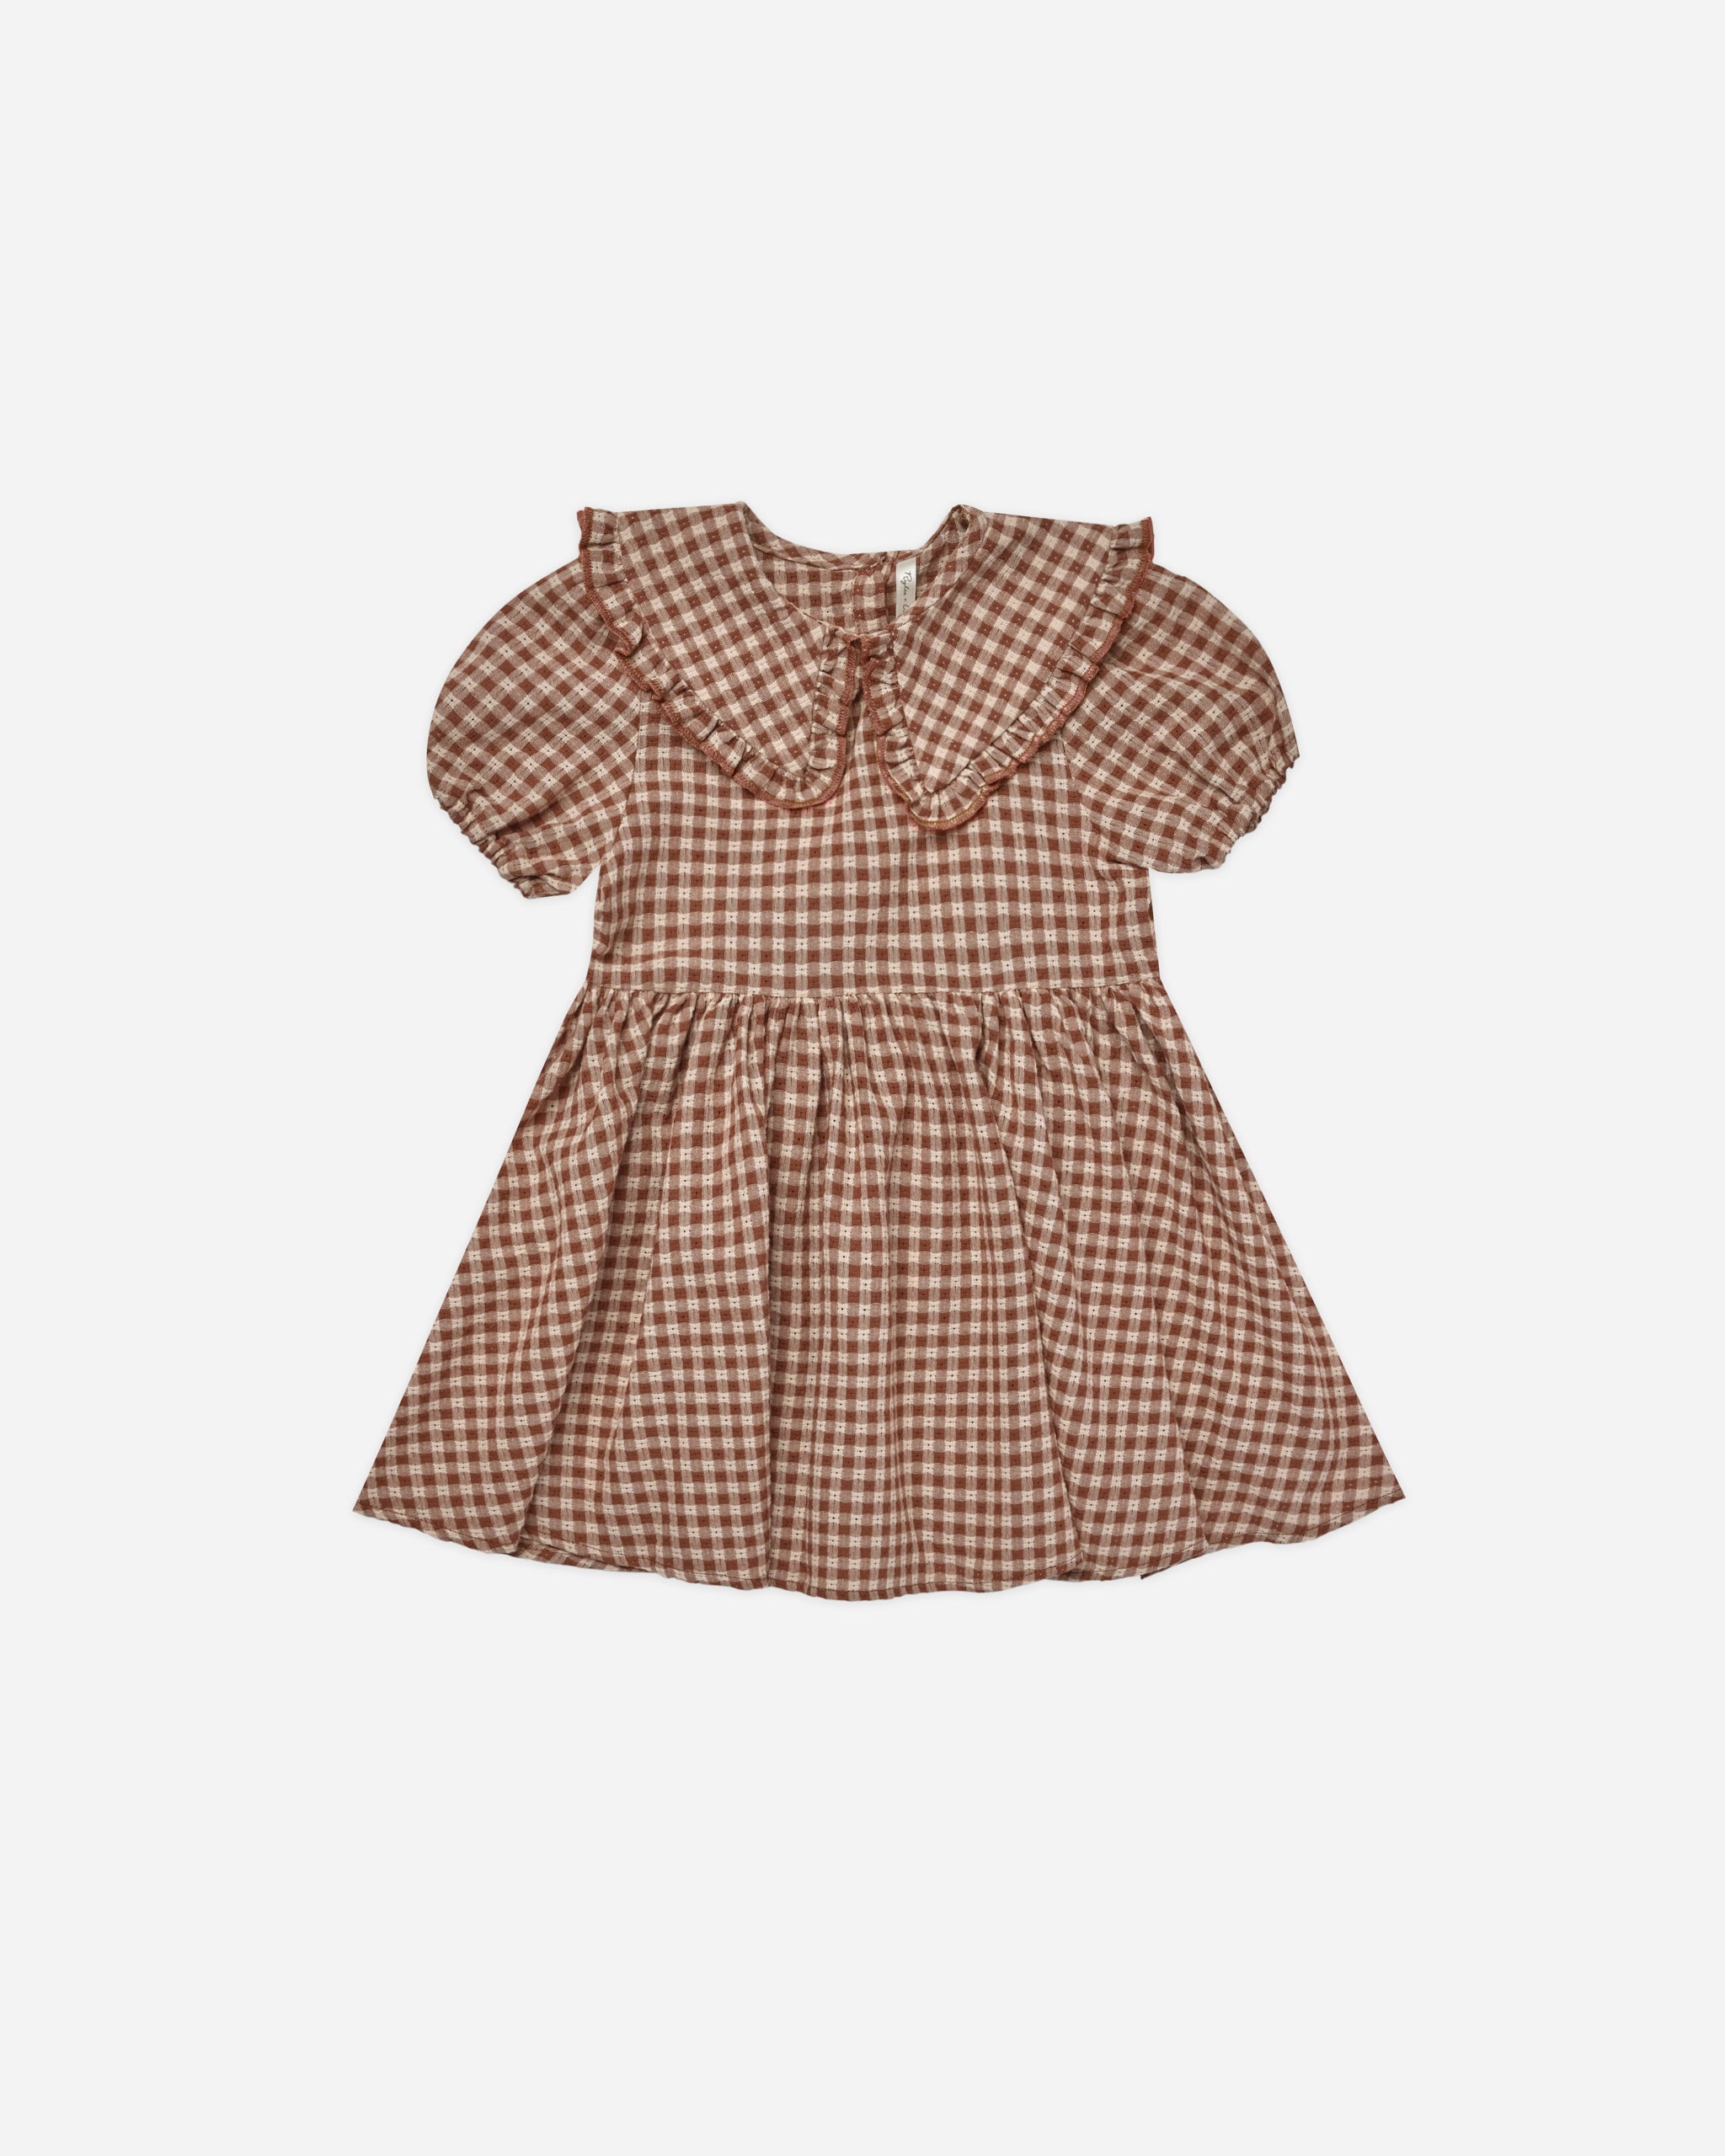 Camille Dress || Brown Gingham - Rylee + Cru | Kids Clothes | Trendy Baby Clothes | Modern Infant Outfits |